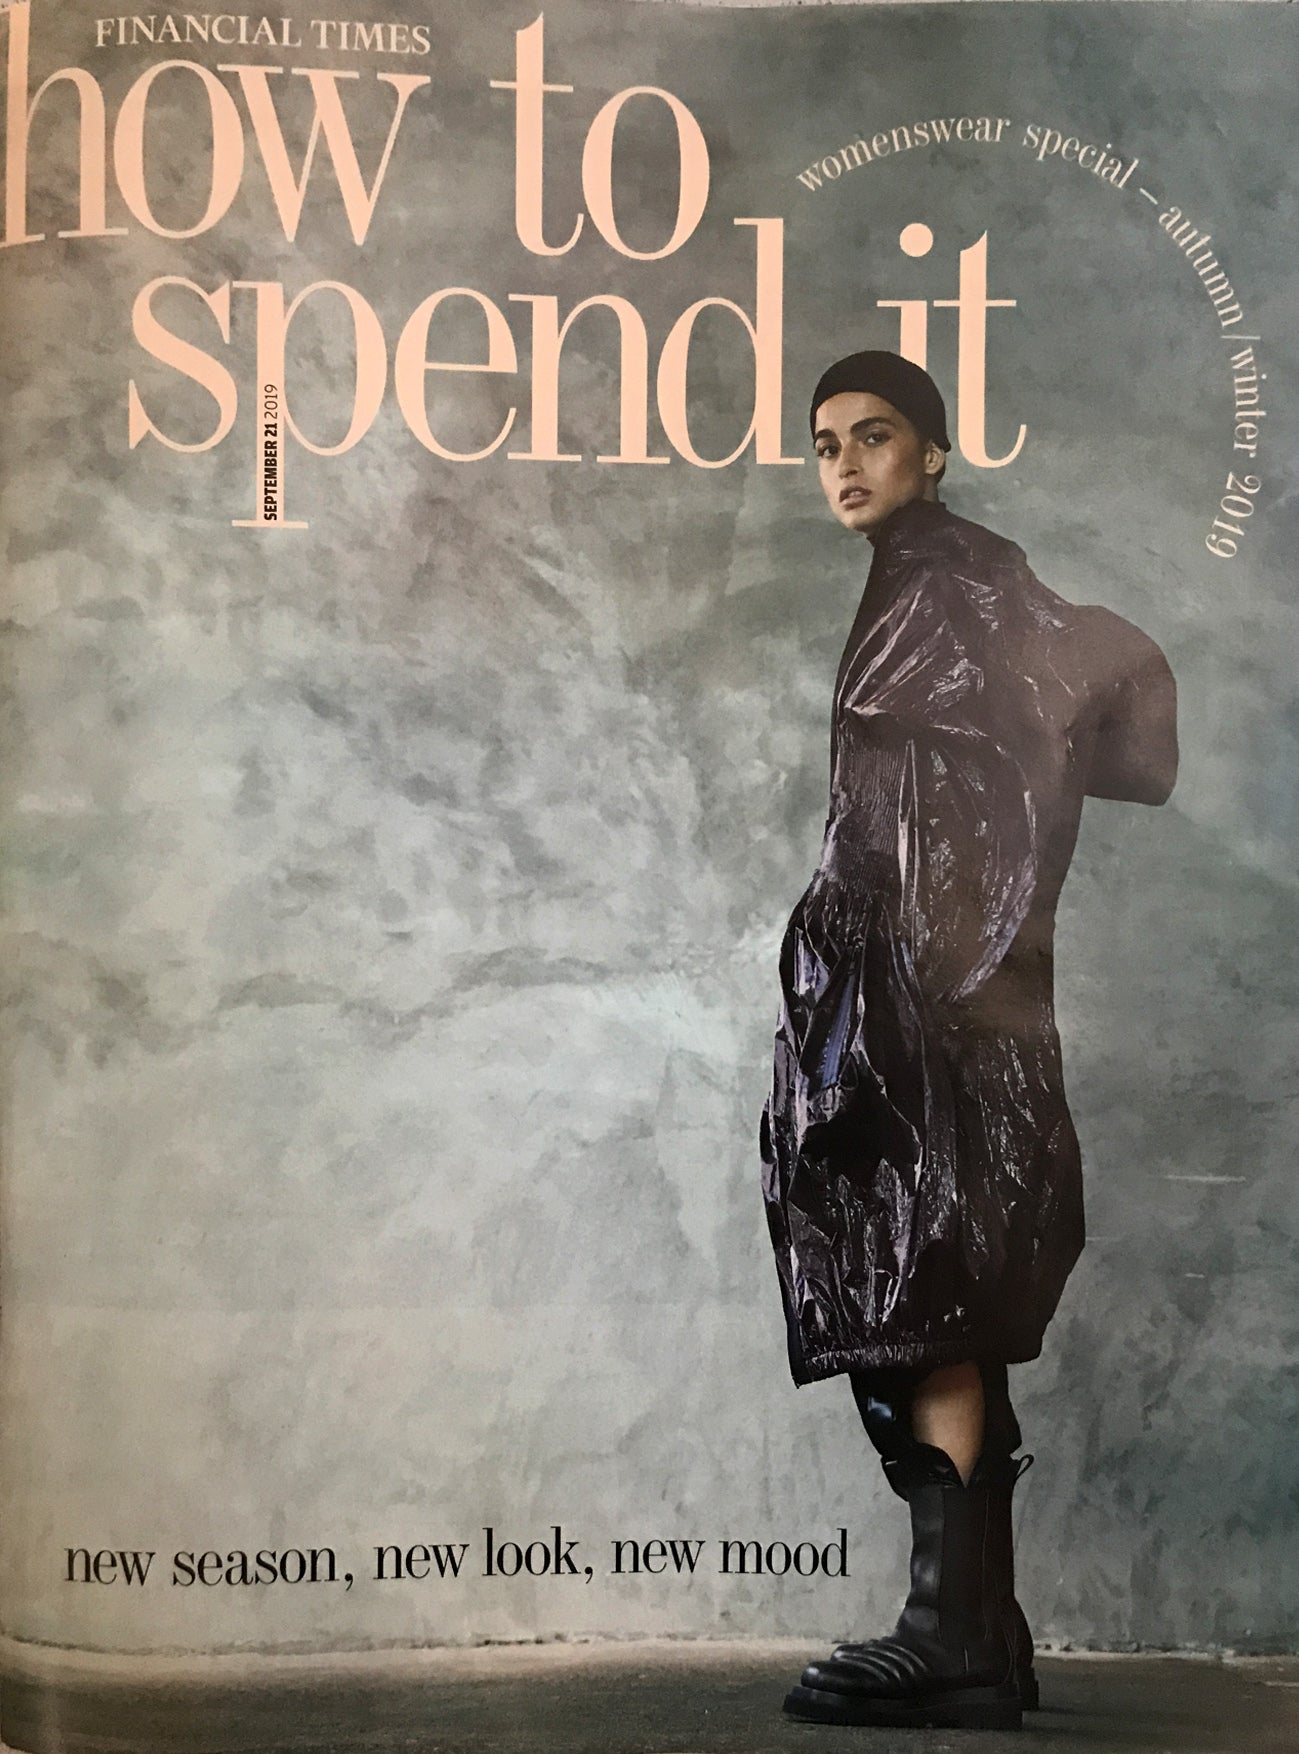 How To Spend It - Financial Times